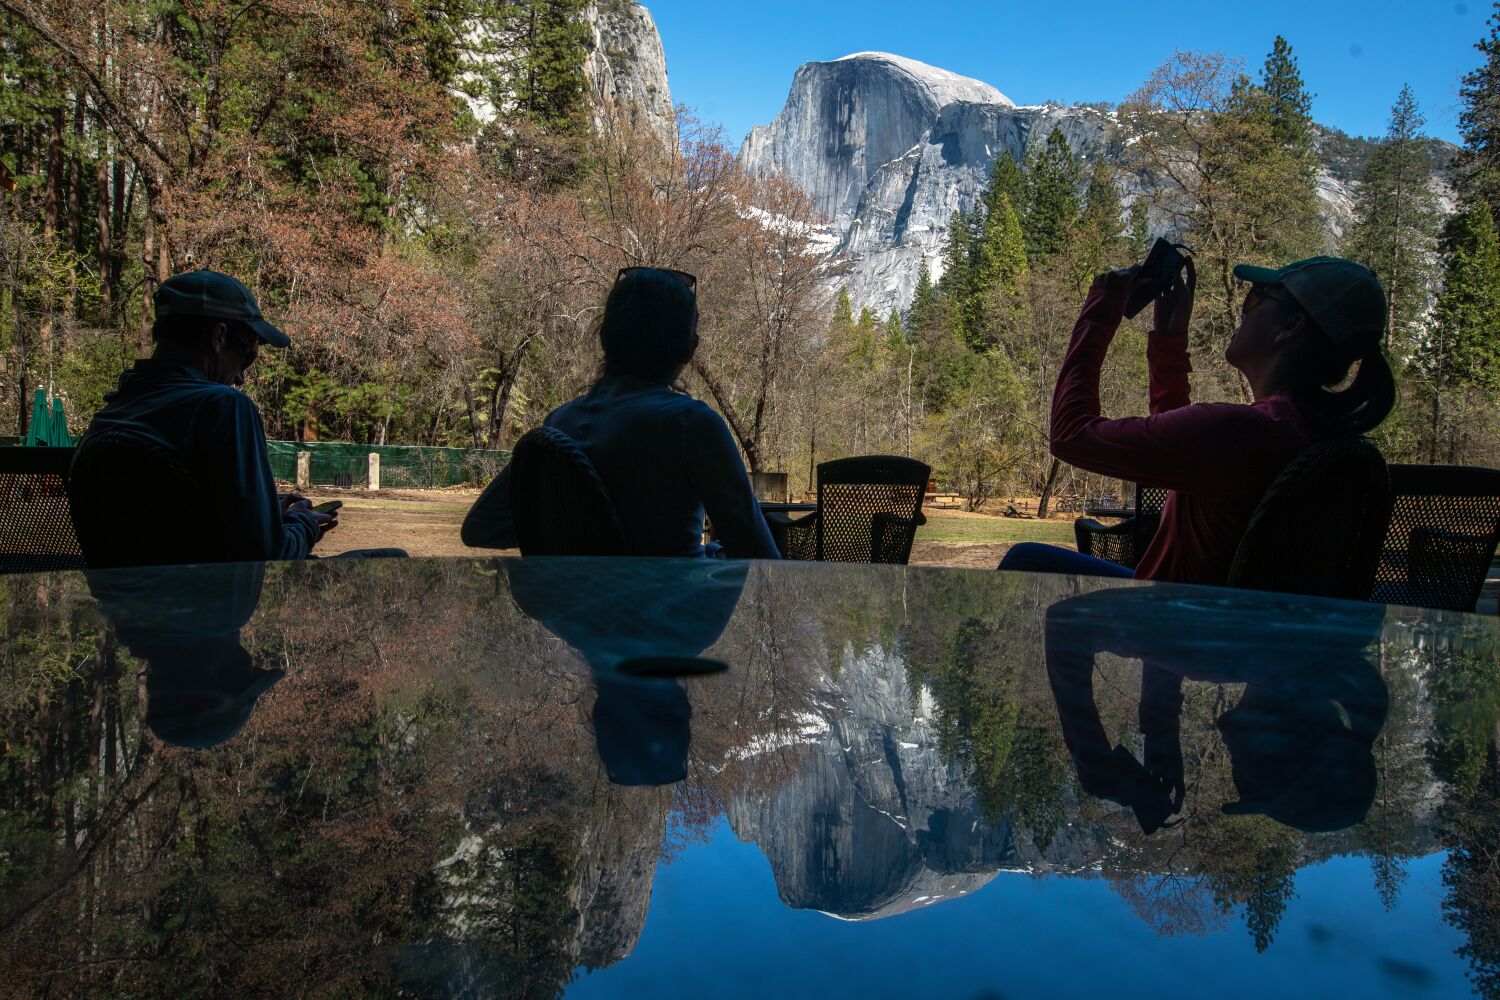 'Like sitting on the 101 in L.A.': Yosemite visitors wait in line for hours to enter park